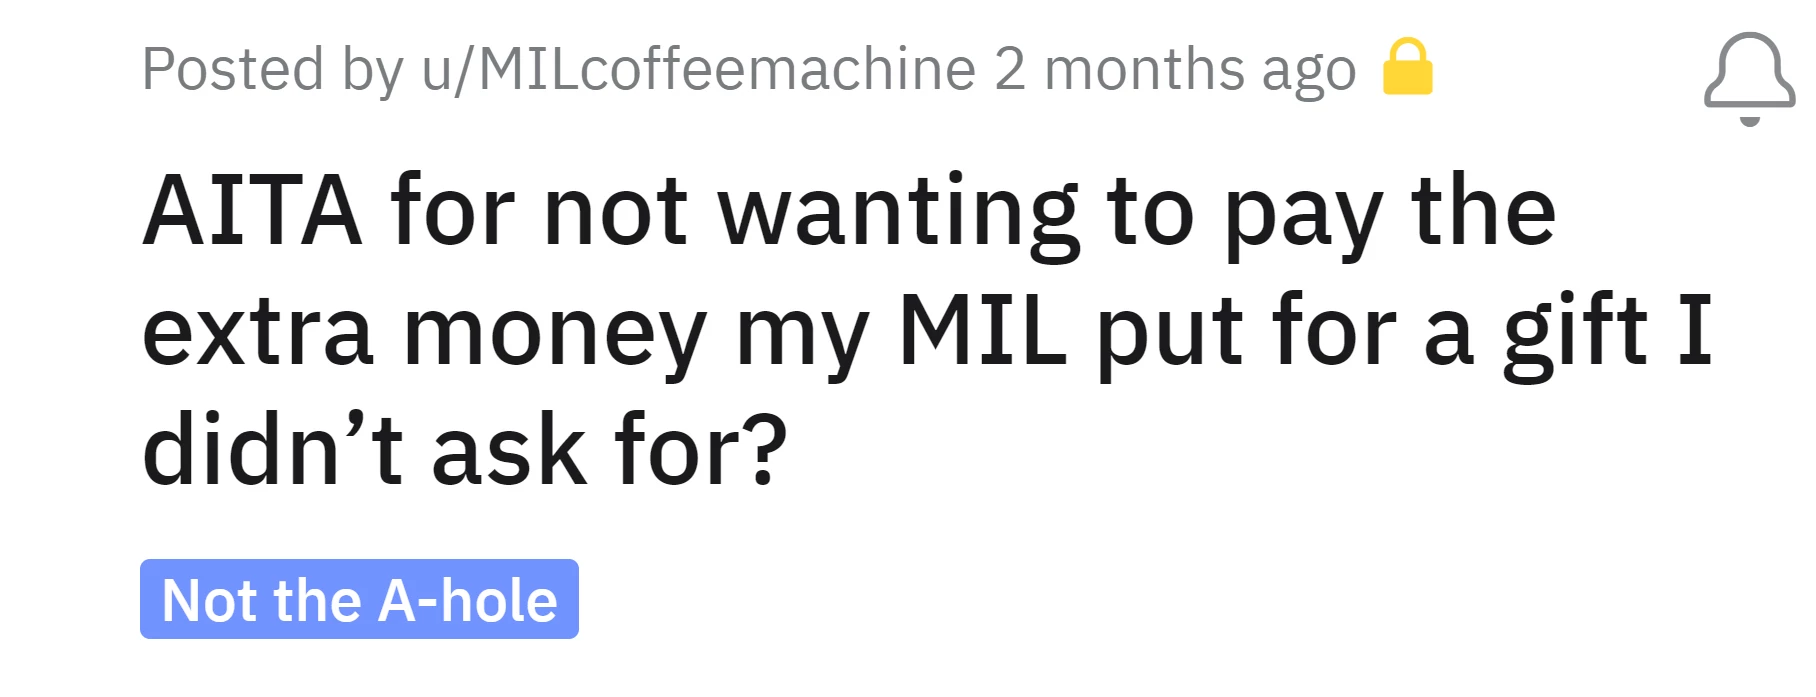 Mother-in-law gave OP a $80 coffee machine and asked for $30 extra because she'd budgeted only $50